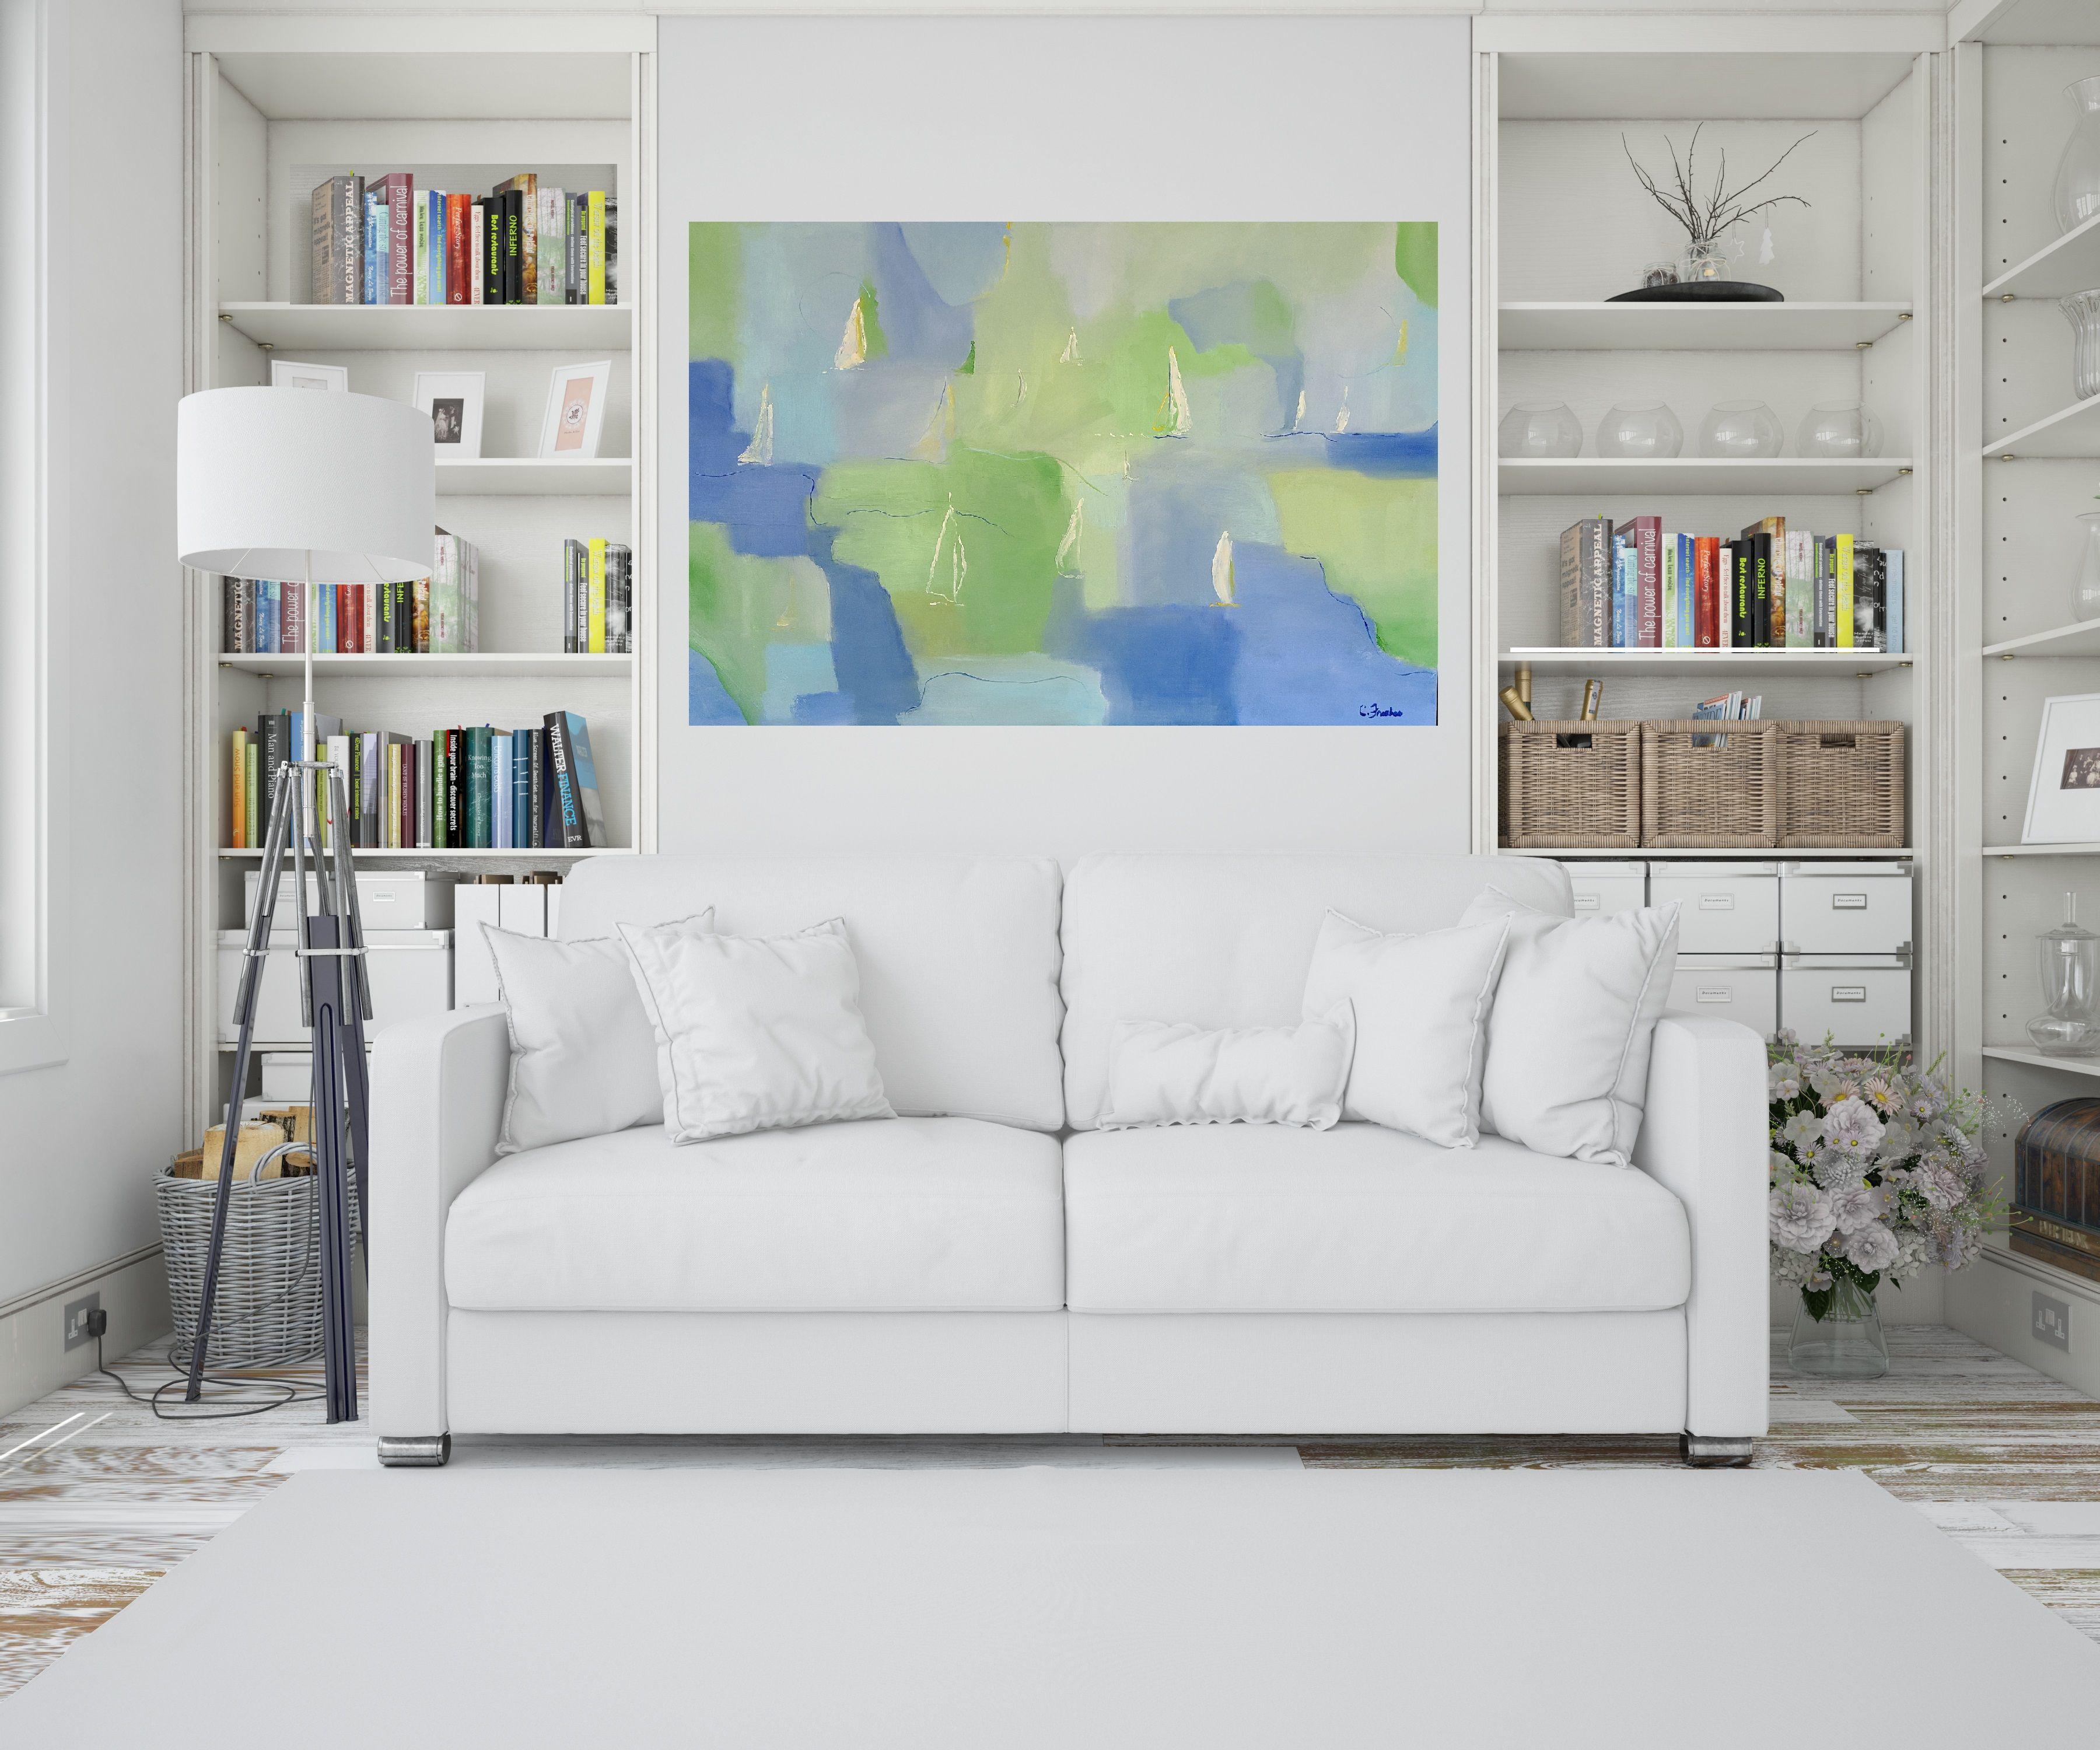 Sailing the Bays is an abstract oil on canvas that represents the five bays that surround the towns of Osterville and Cotuit on Cape Cod. The bays are precious waterways that sailors enjoy for their afternoon sails around this part of the Cape which